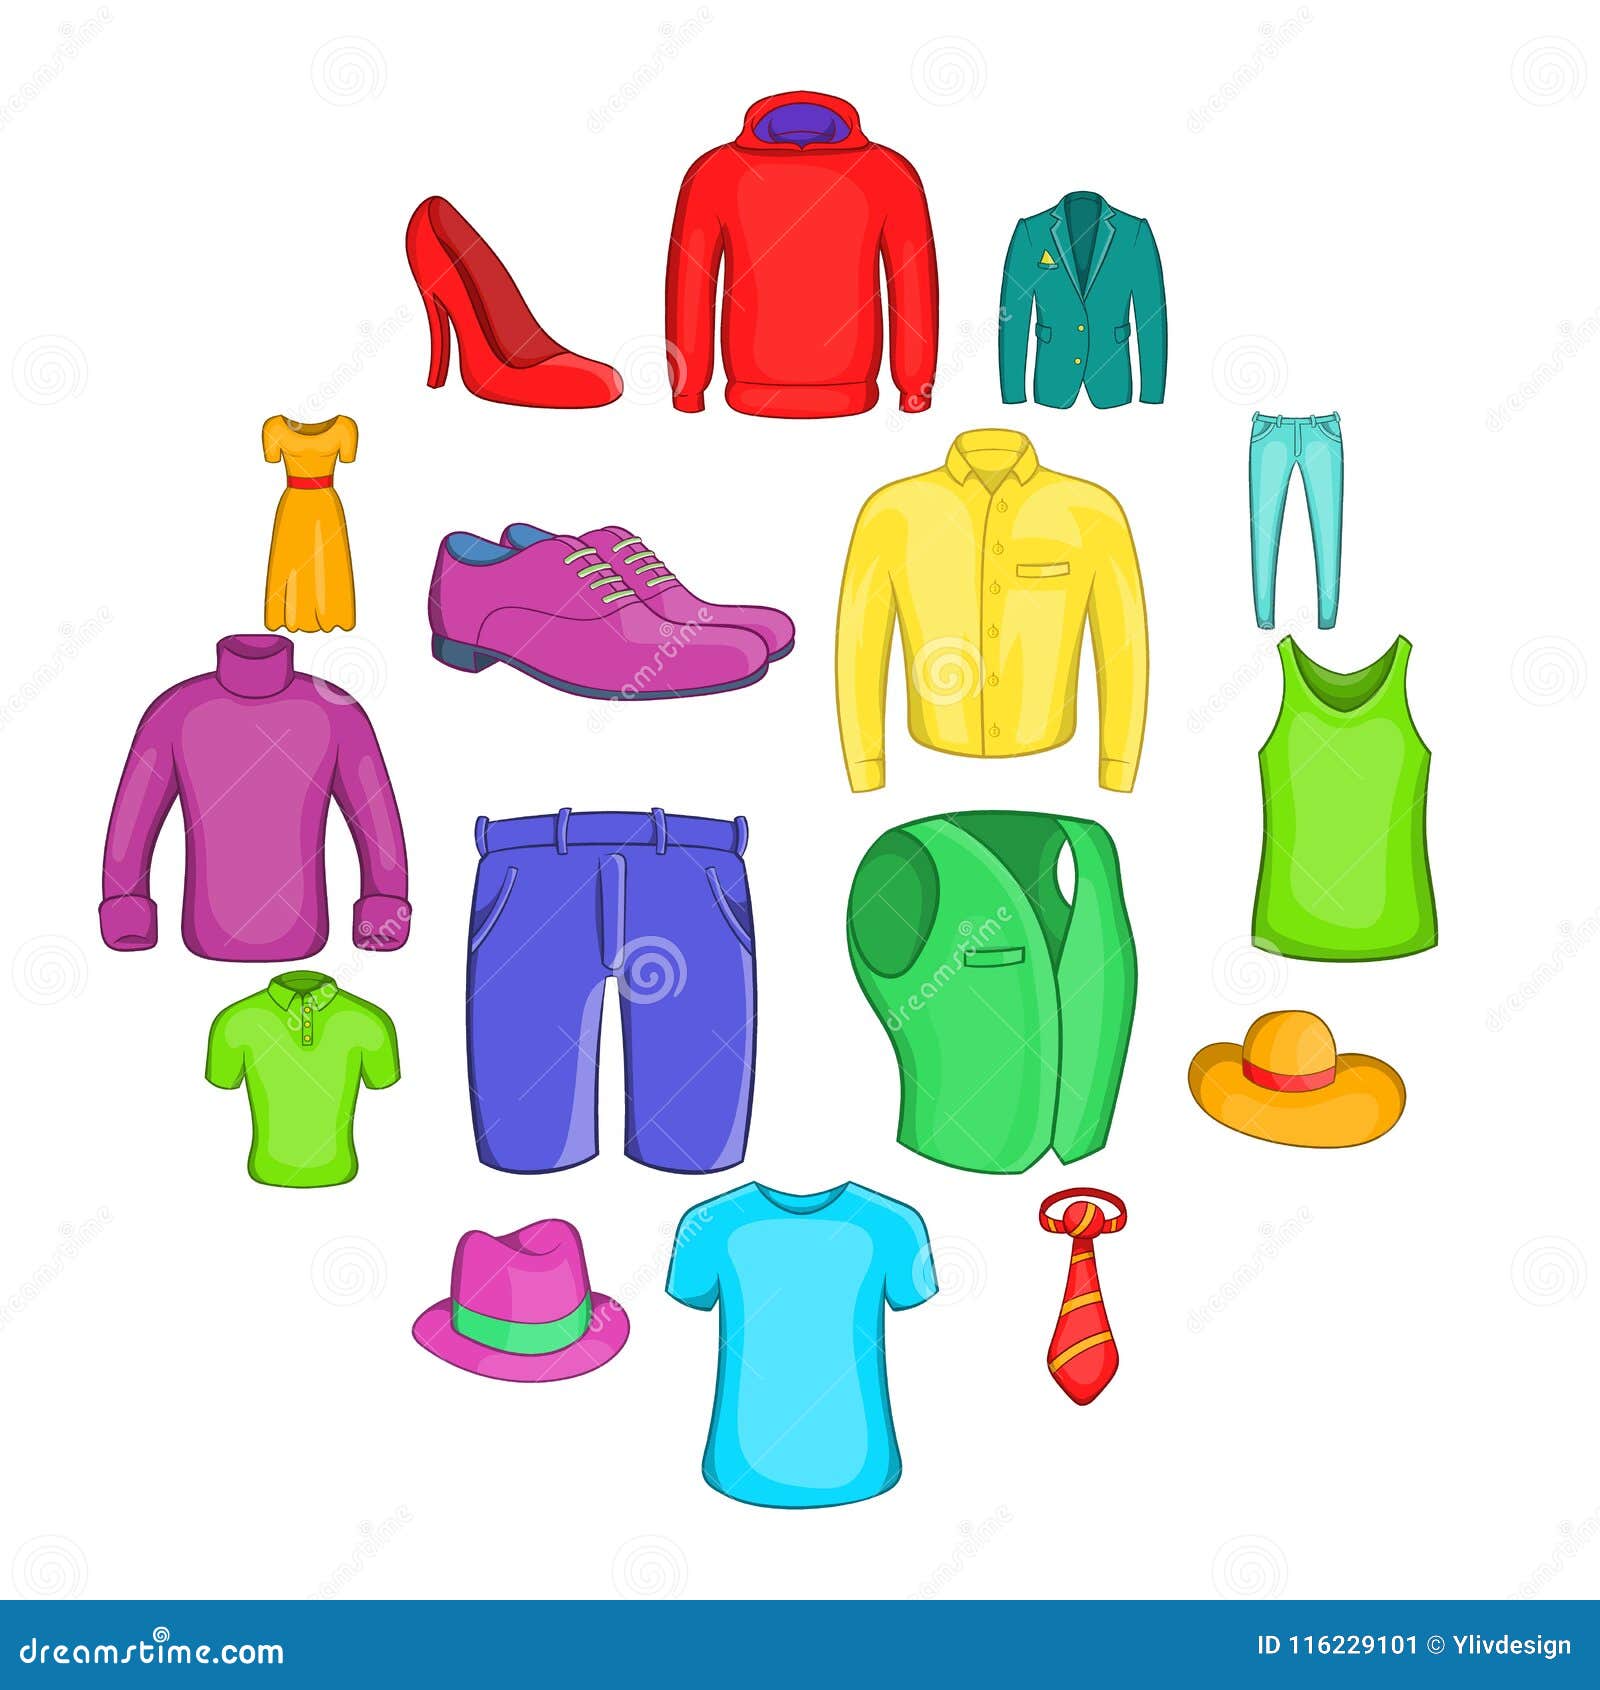 Clothes Icons Set, Cartoon Style Stock Vector - Illustration of objects ...